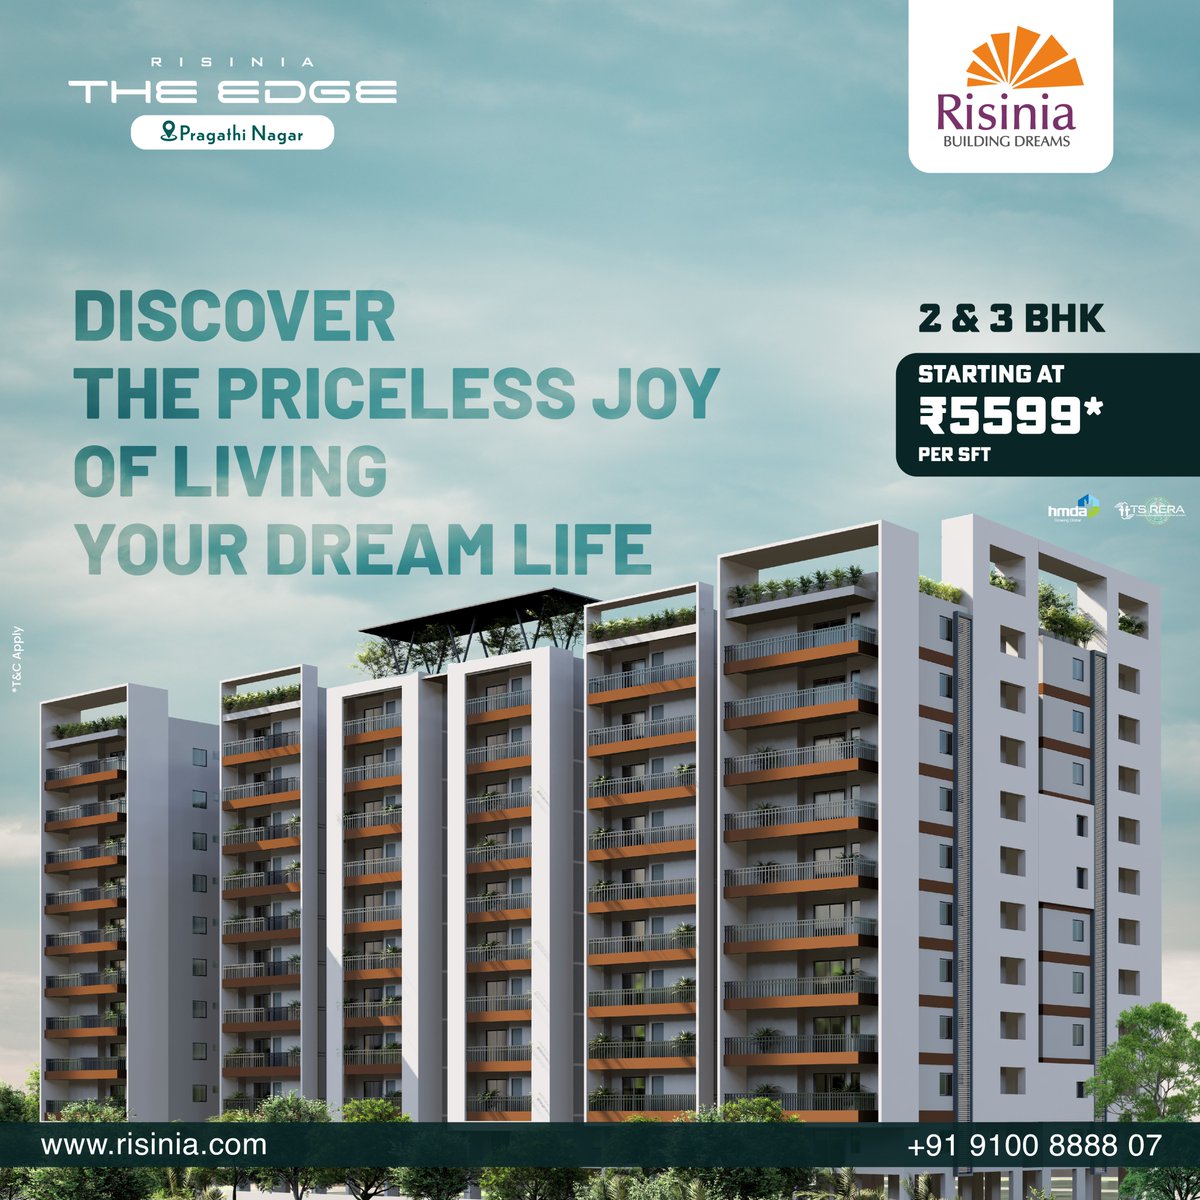 This investment brings you joy that knows no bounds. Rise to modern-day living with The Edge.
For more details visit our website: risiniatheedge.com

#risinia #risiniabuilders #risiniatheedge #pragathinagar #2bhkflatsforsaleinpragathinagar #3bhkflatsforsaleinpragathinagar